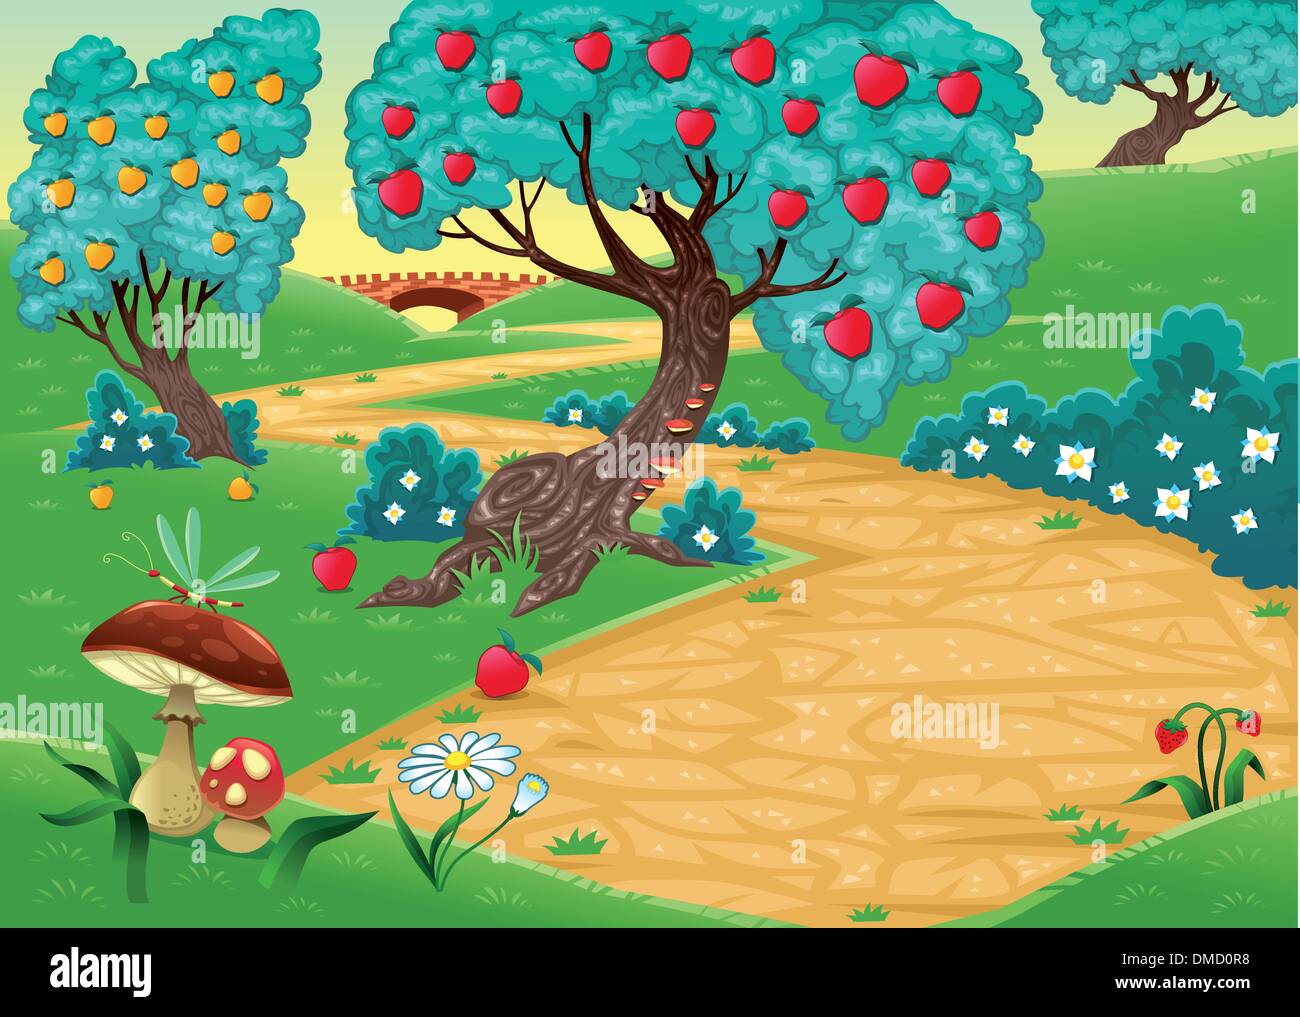 Wood with fruit trees. Stock Vector